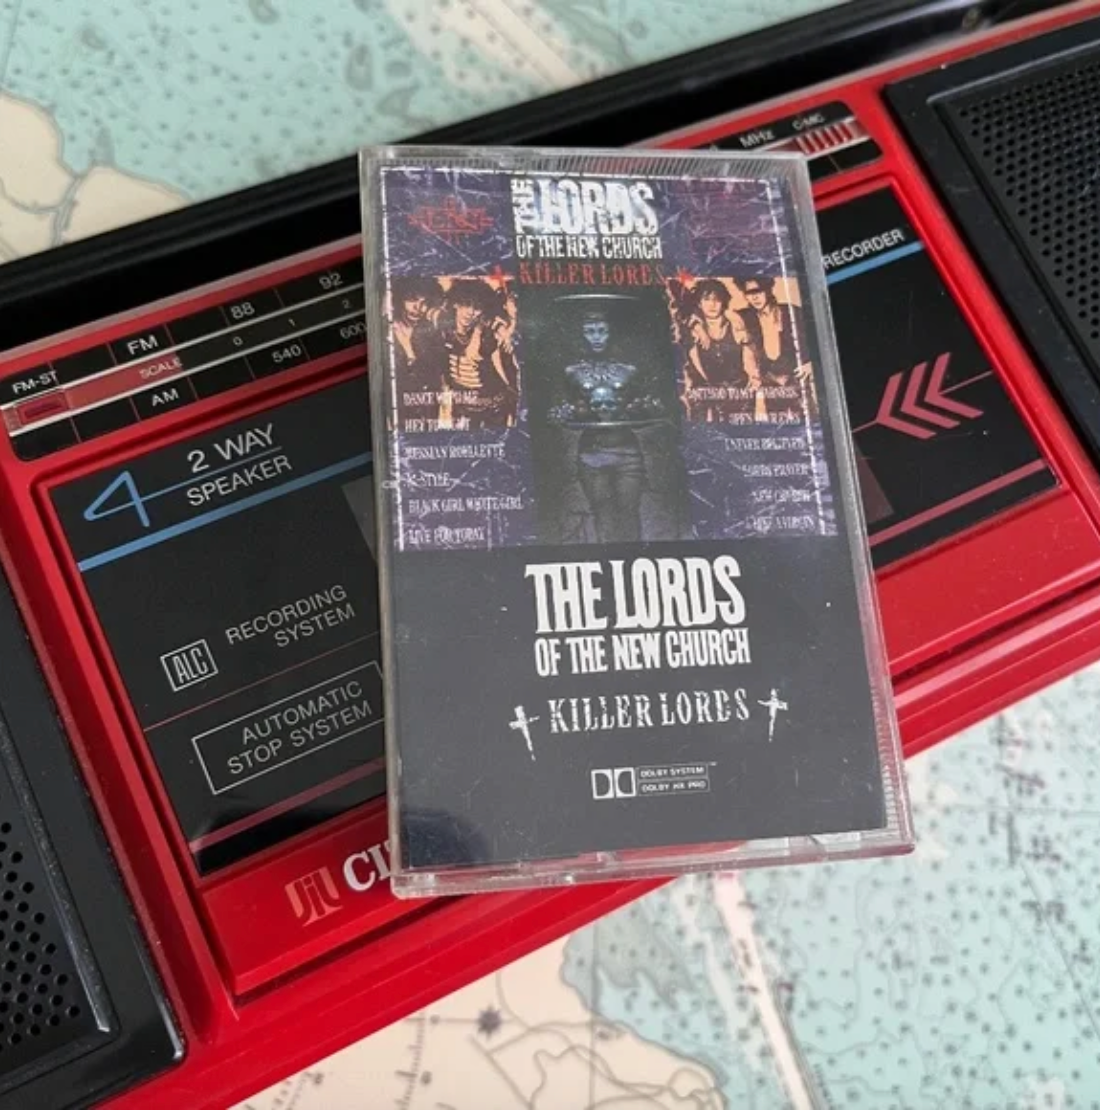 Vintage 1985 The Lords Killer Lords Cassette Tape